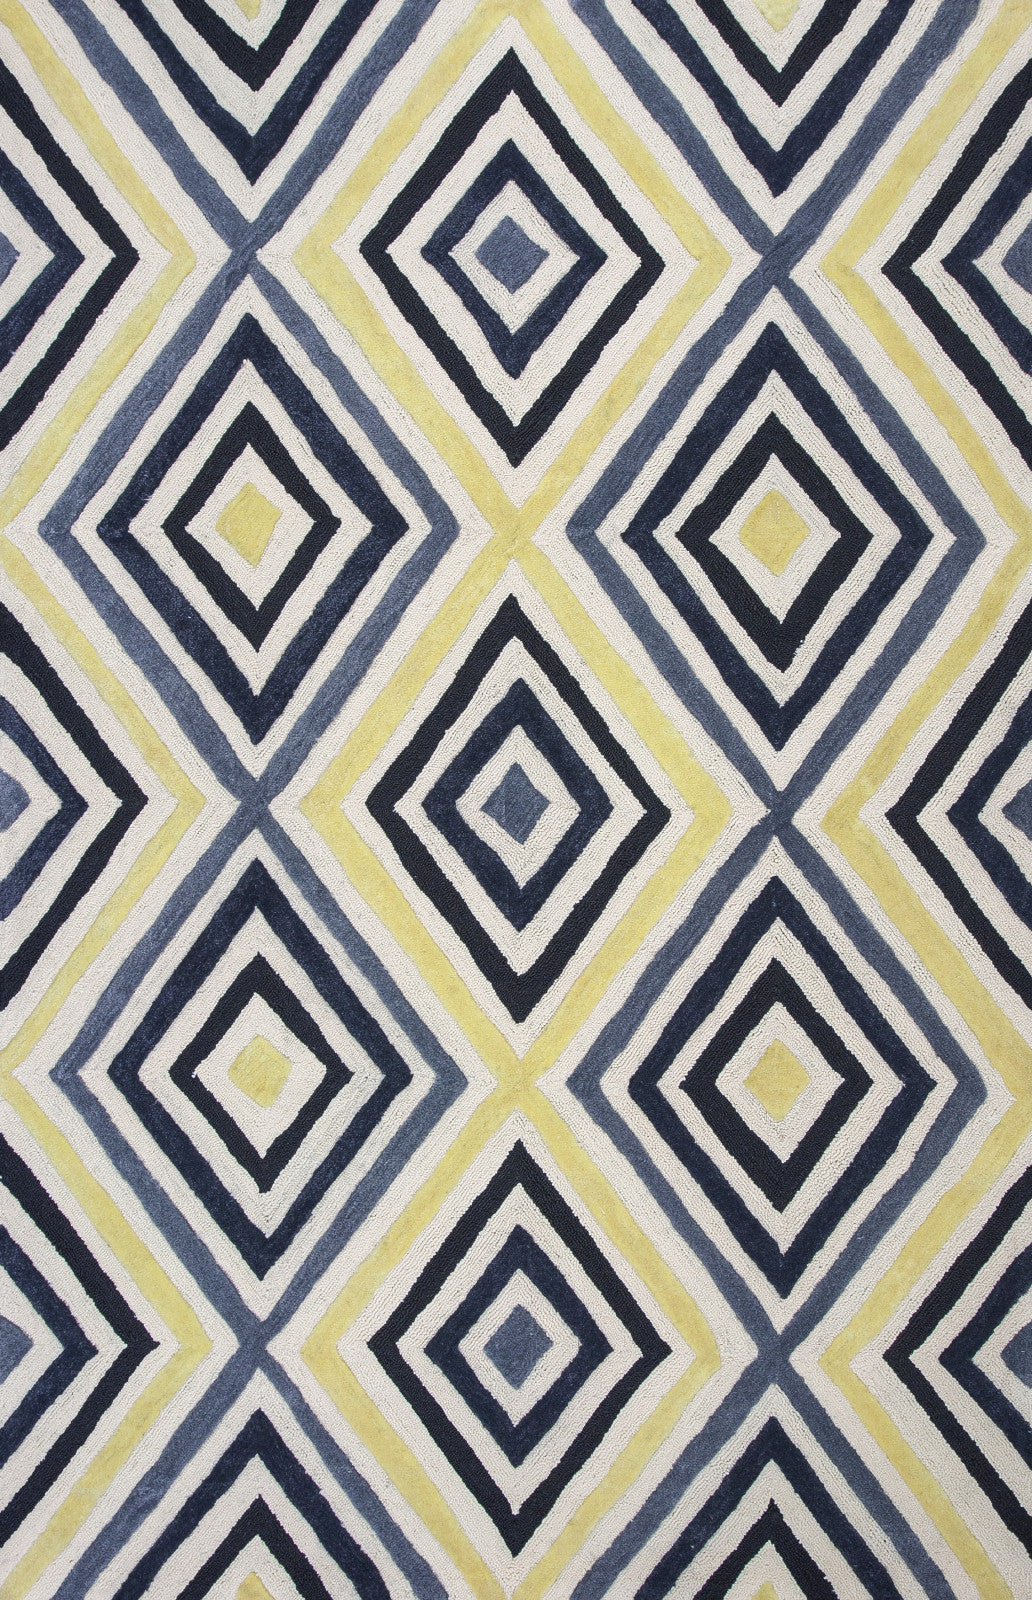 KAS Home Escape 7908 Ivory/Blue Dimensions Hand Woven Area Rug by Donny Osmond